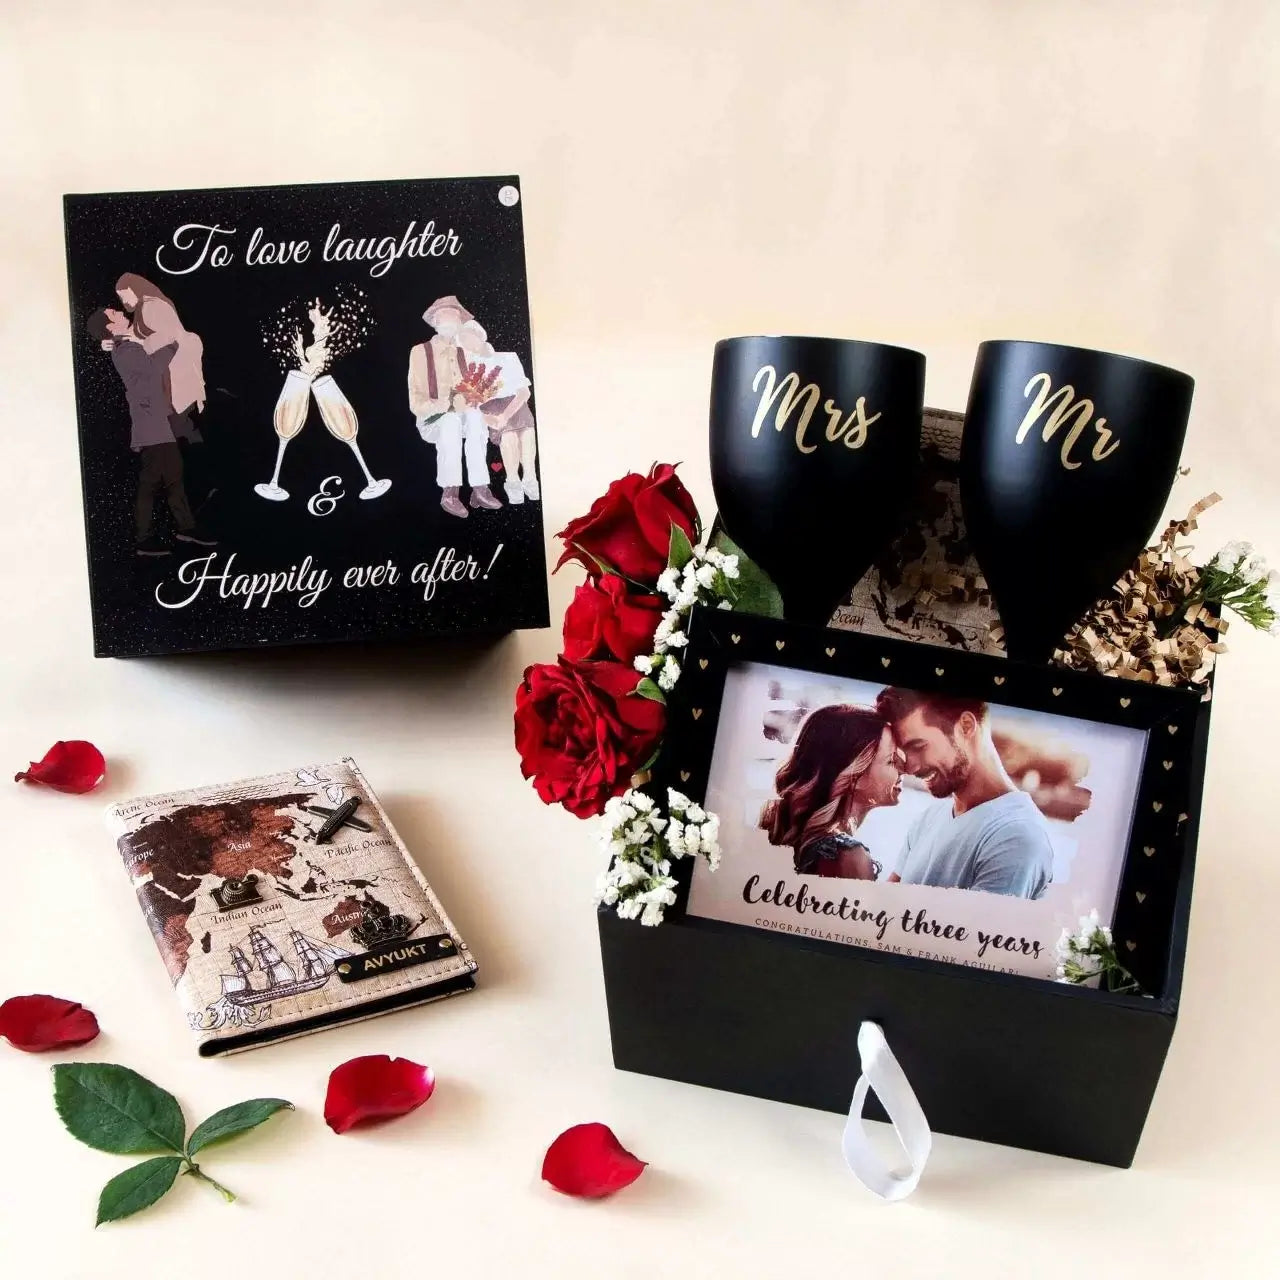 20 Custom Photo Gift Ideas | Best Picture Gifts for Family – Legacybox